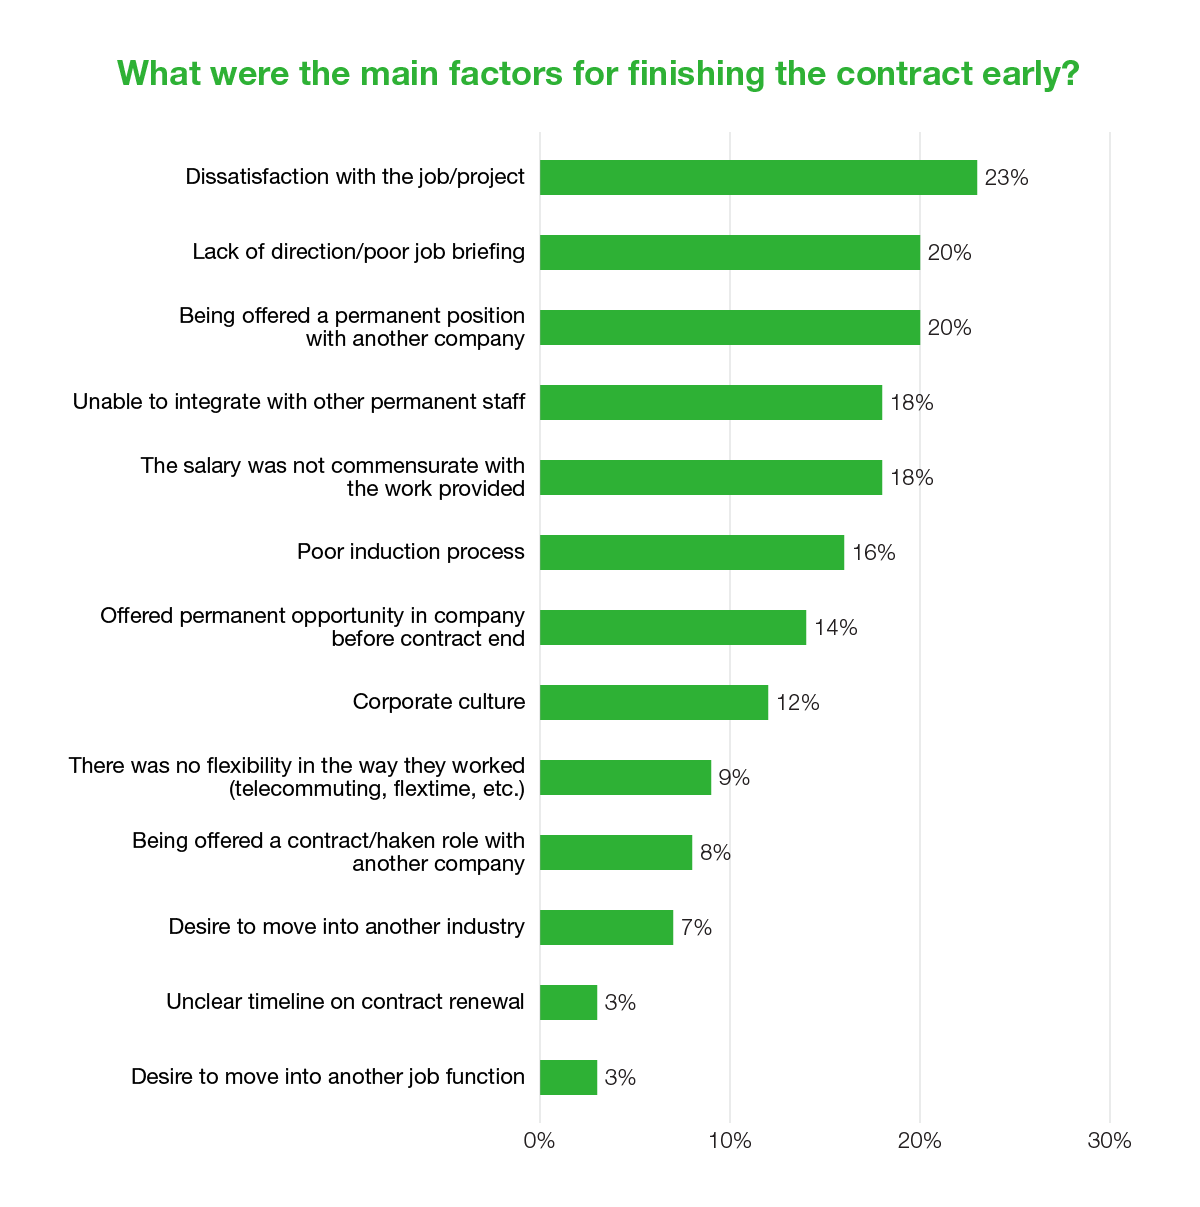 What were the main factors for finishing the contract early?